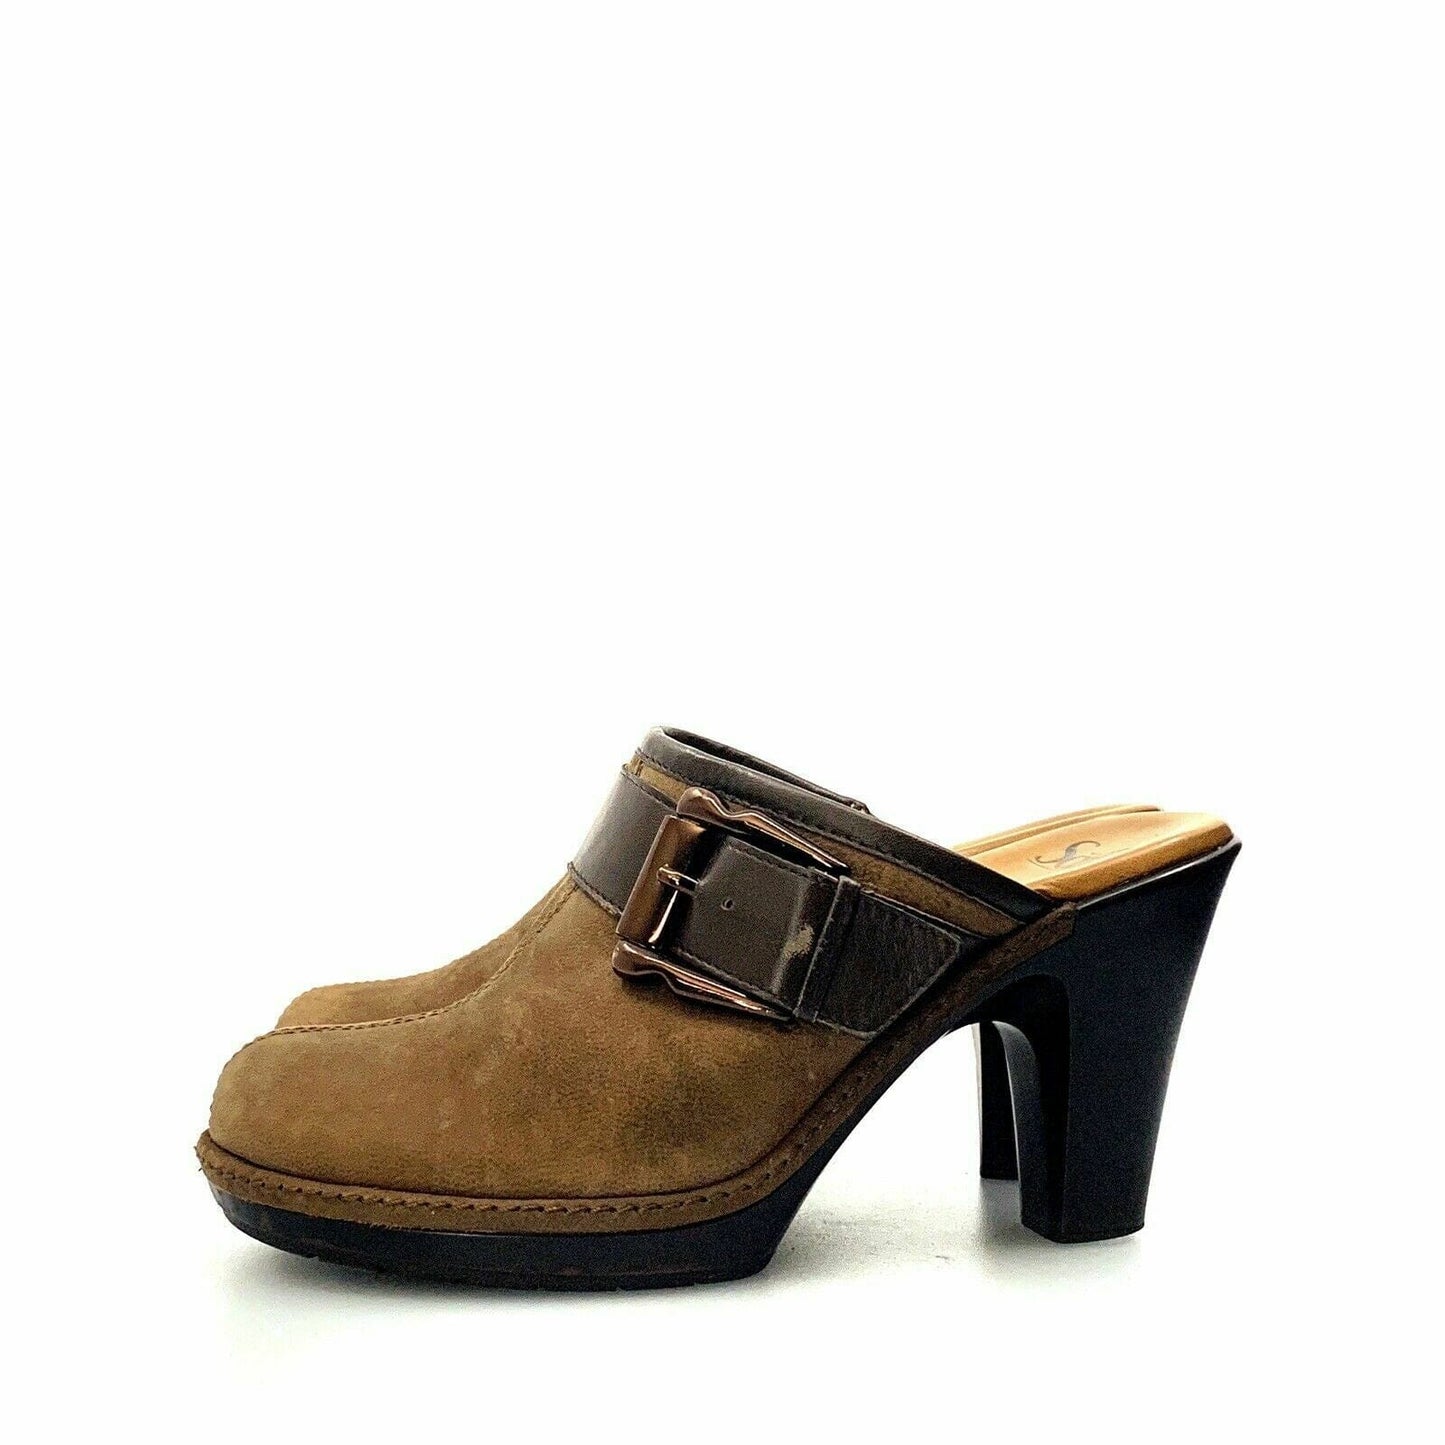 Sofft Womens Size 8M Brown Mules Shoes Leather Aviano Buckle Heeled